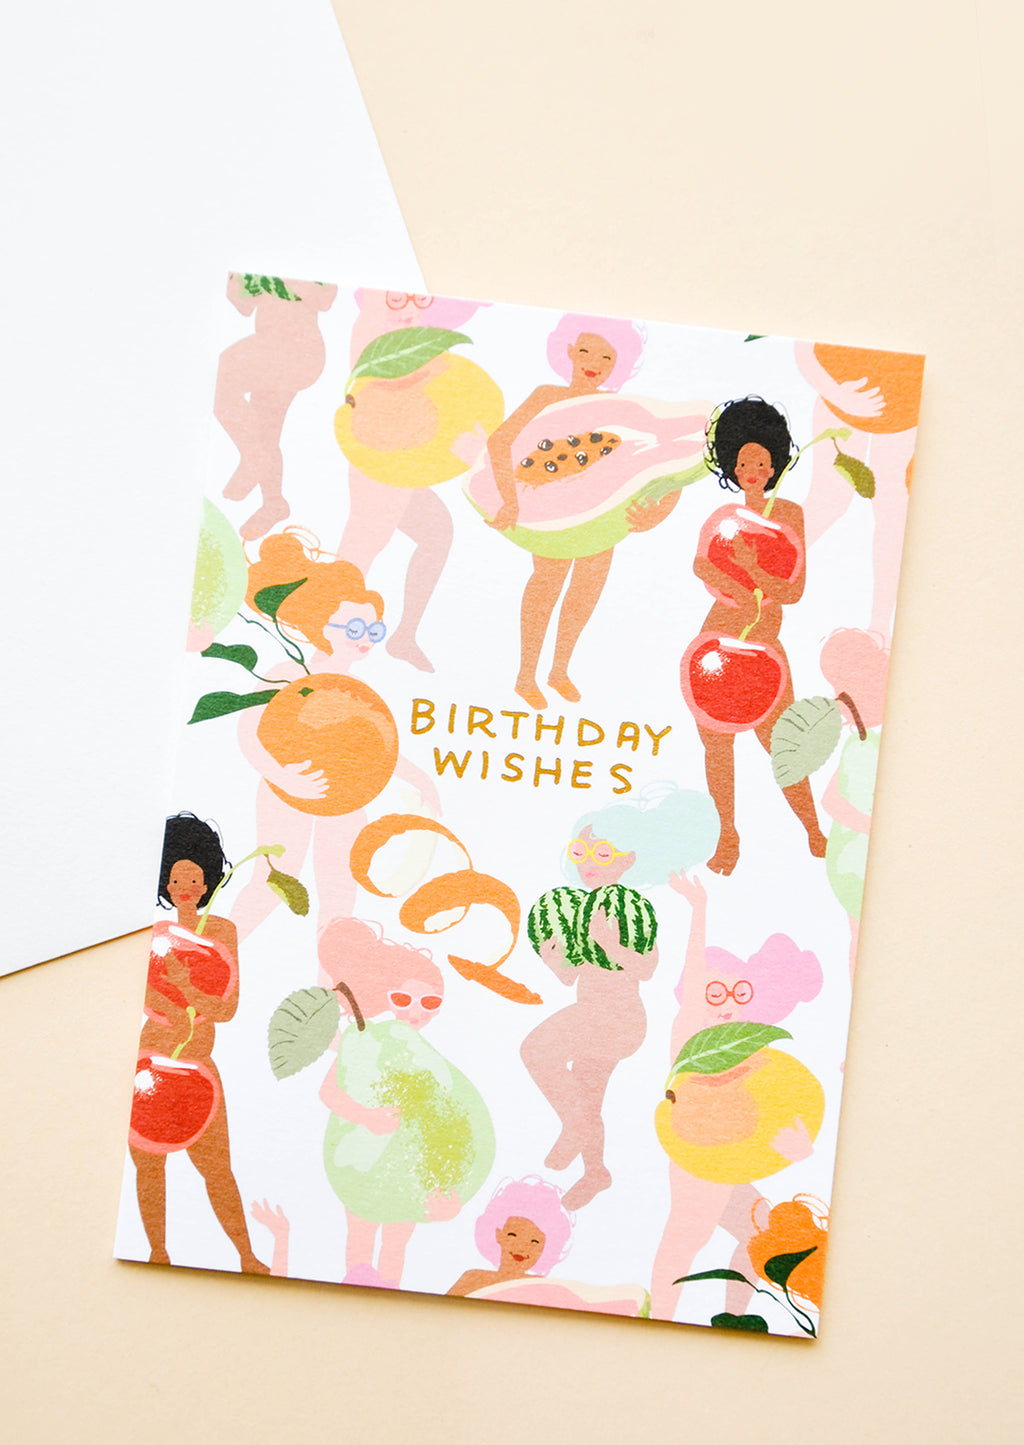 1: Greeting card with illustrated people, covering themselves with fruit. "Birthday Wishes" written in orange text. Shown with white envelope. 